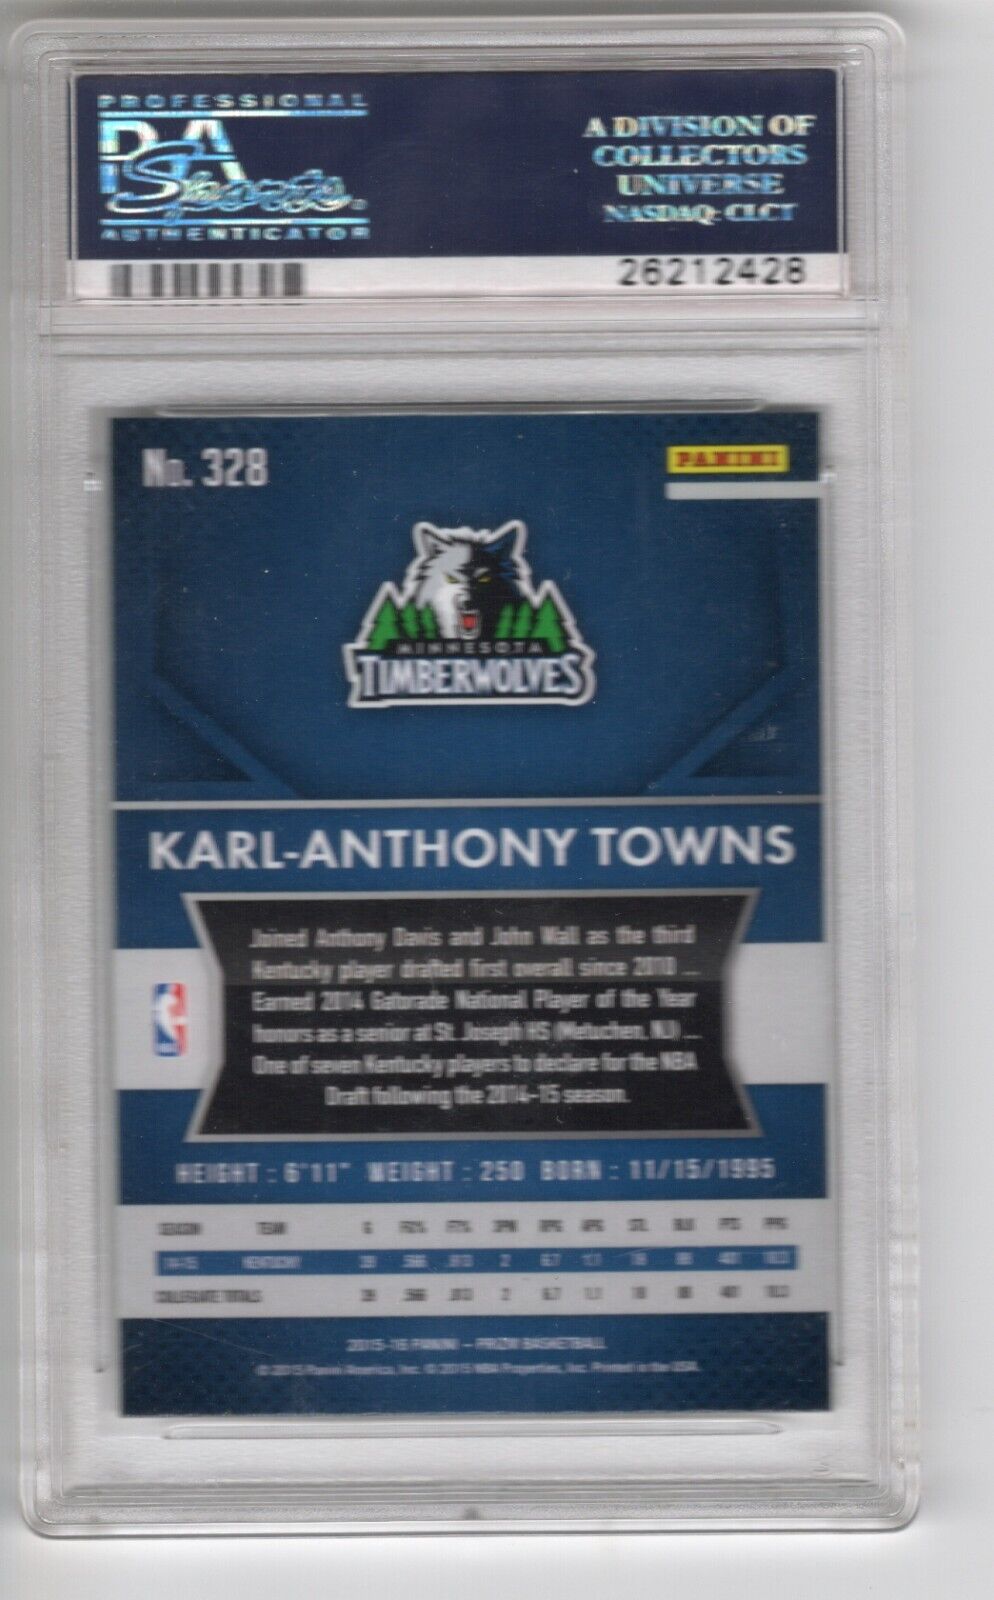 2015/16 Panini Prizm Basketball #328 Karl-Anthony Towns Rookie Card RC PSA 10 - 643-collectibles